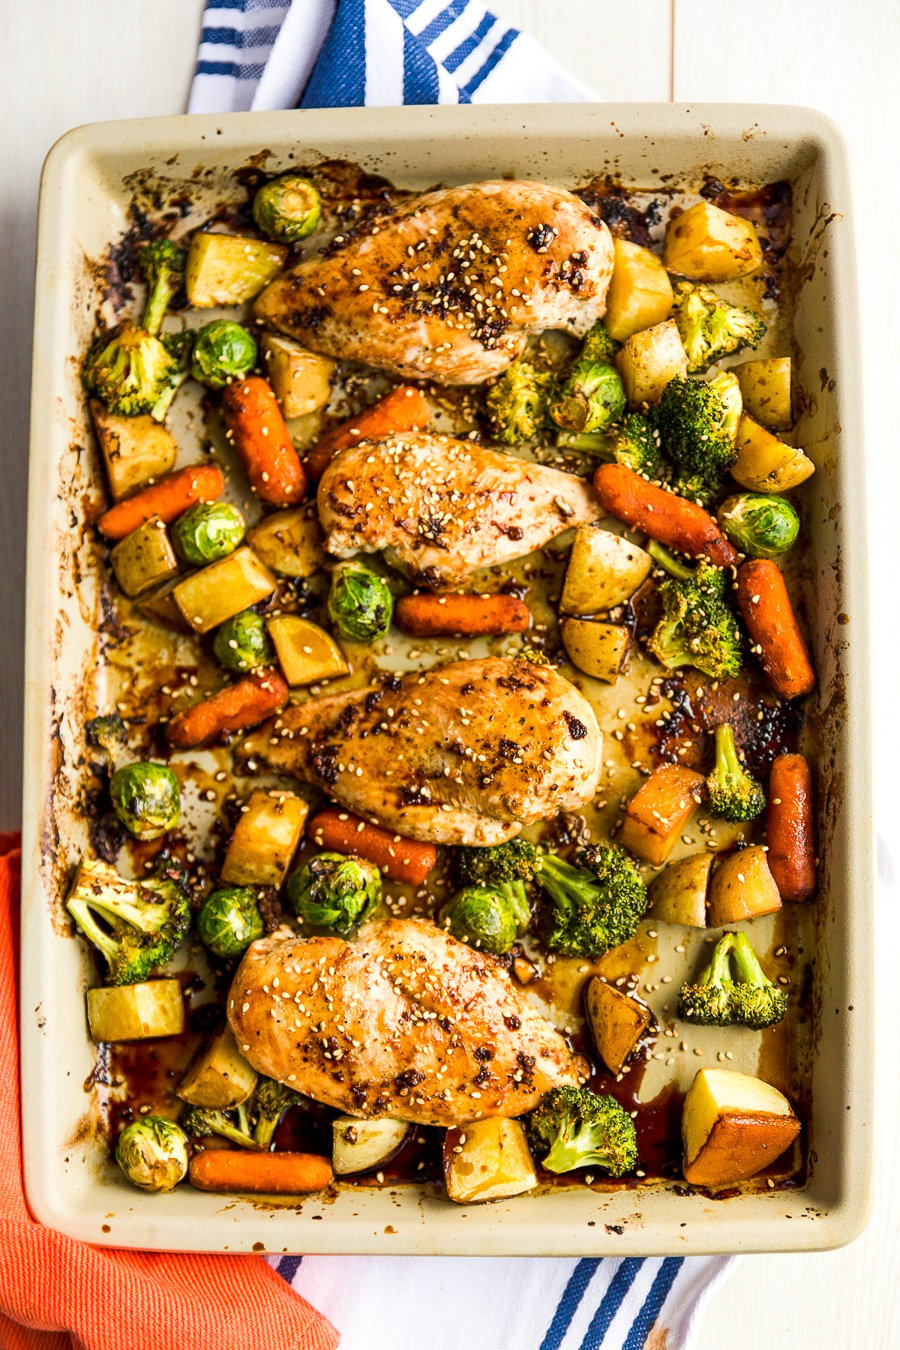 This Honey Ginger Chicken Sheet Pan Dinner is an easy Asian-inspired dish made with a tangy homemade sauce. You only need one pan to make it, so cleanup is a breeze!